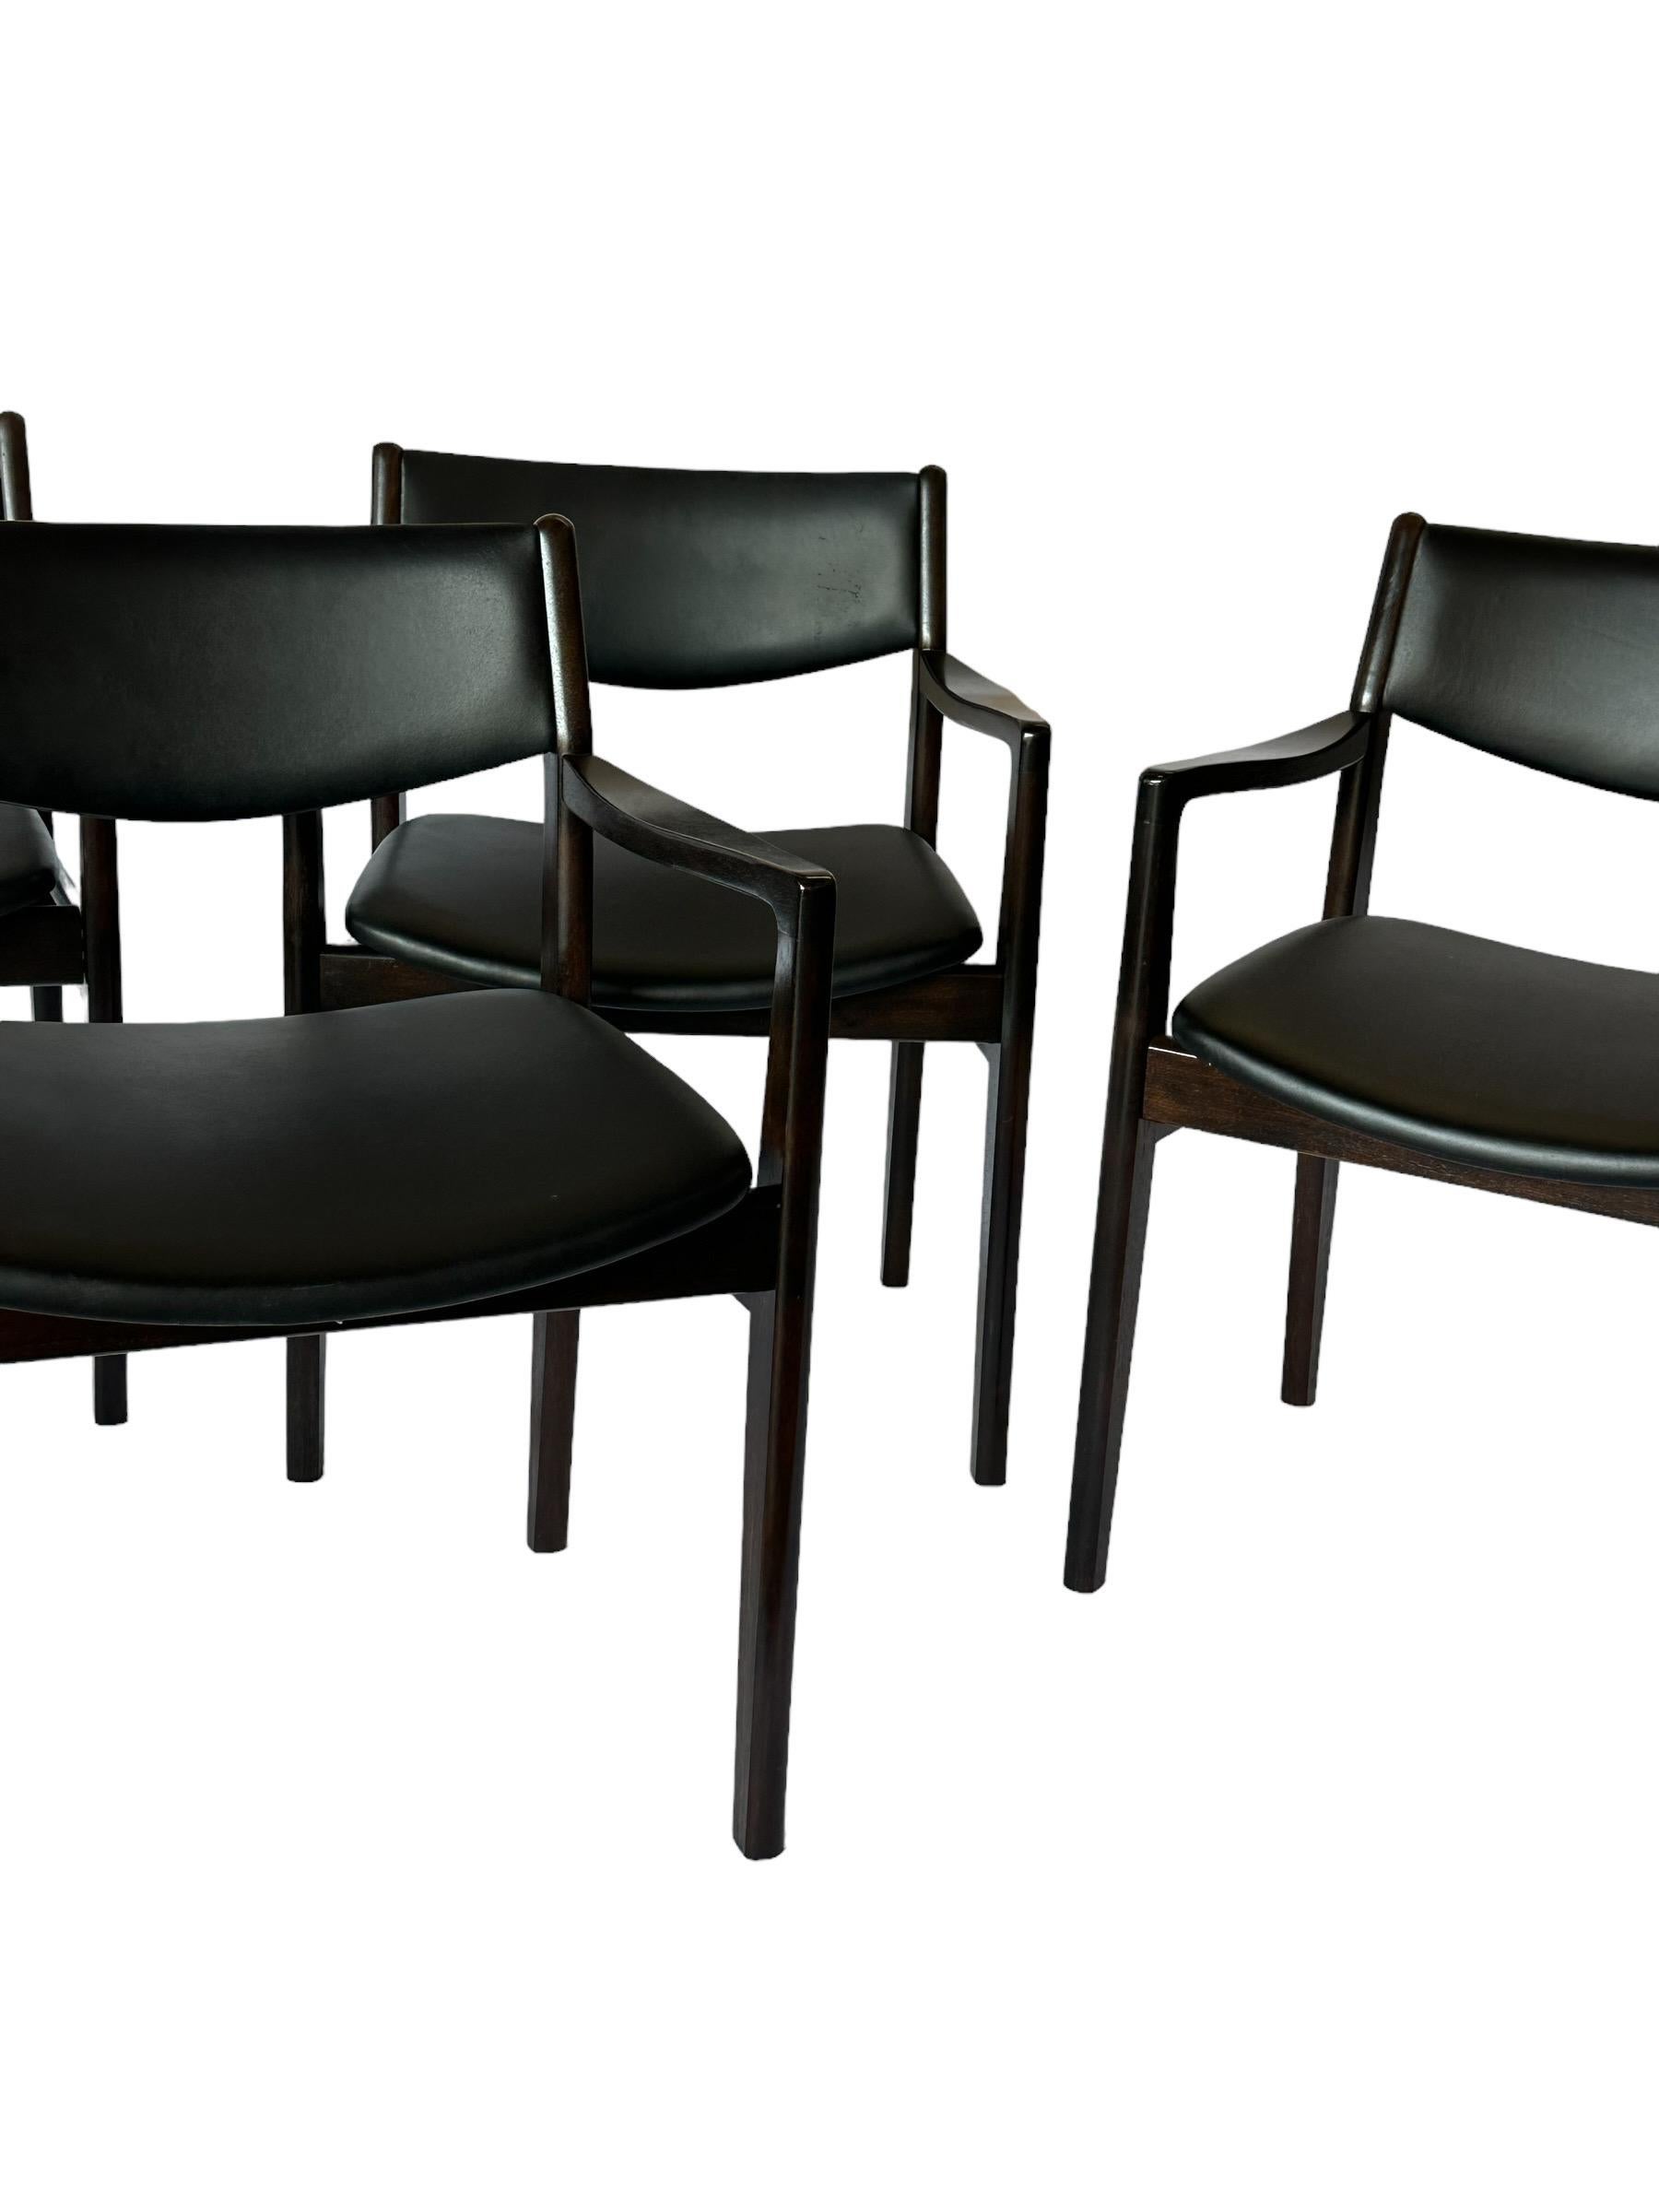 Set of 4 Midcentury Modern Danish Style Hardwood Dining Chairs In Fair Condition For Sale In Brooklyn, NY